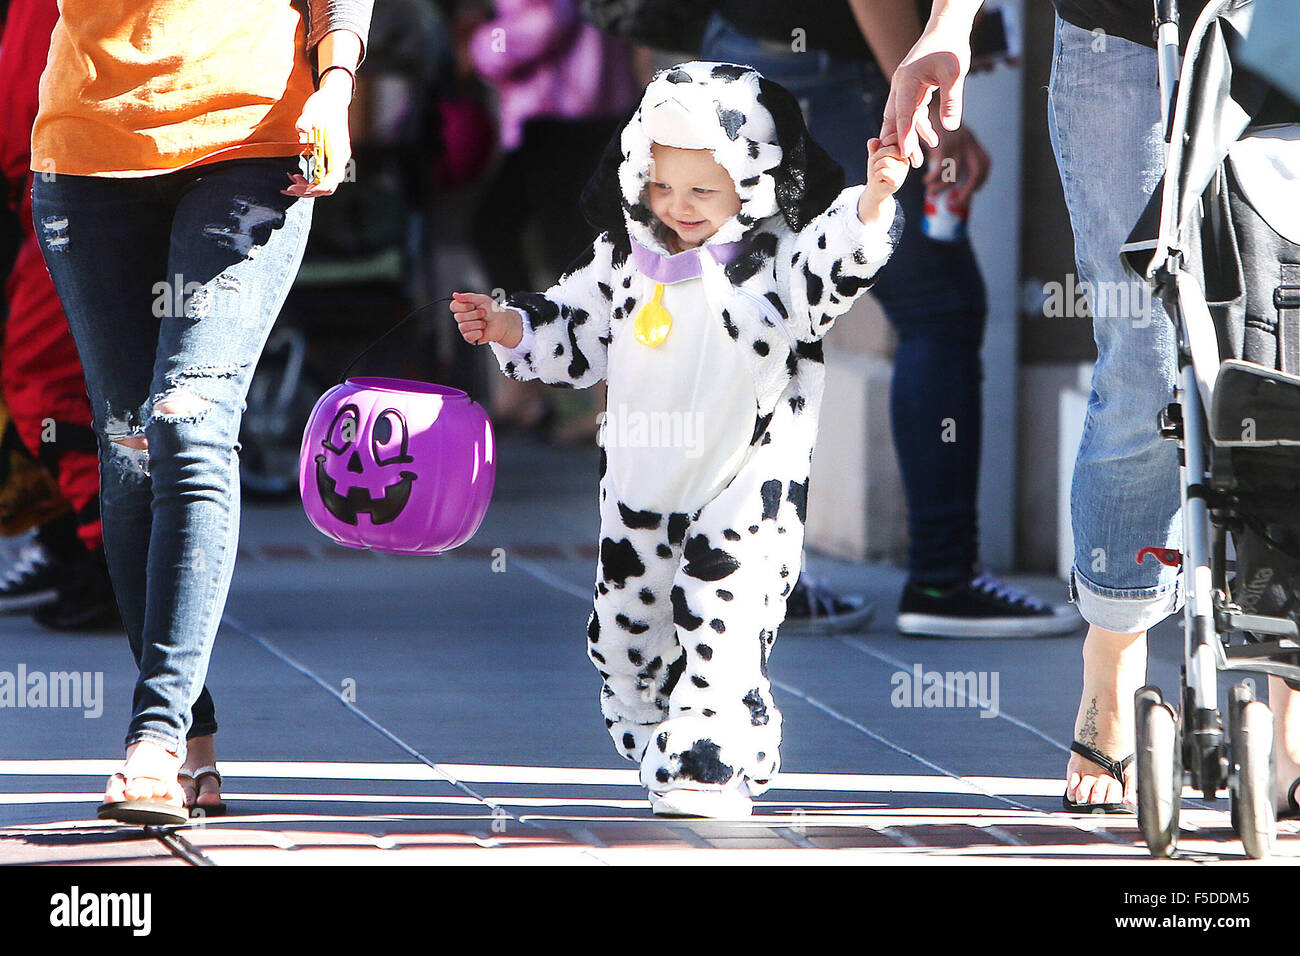 Oct. 31, 2015 - Napa, CA, U.S. - Dressed as a dalmation, eighteen month old Ava Brown trick or treats with her family on First street during the Hometown Halloween in downtown Napa on Saturday. (Credit Image: © Napa Valley Register via ZUMA Wire) Stock Photo